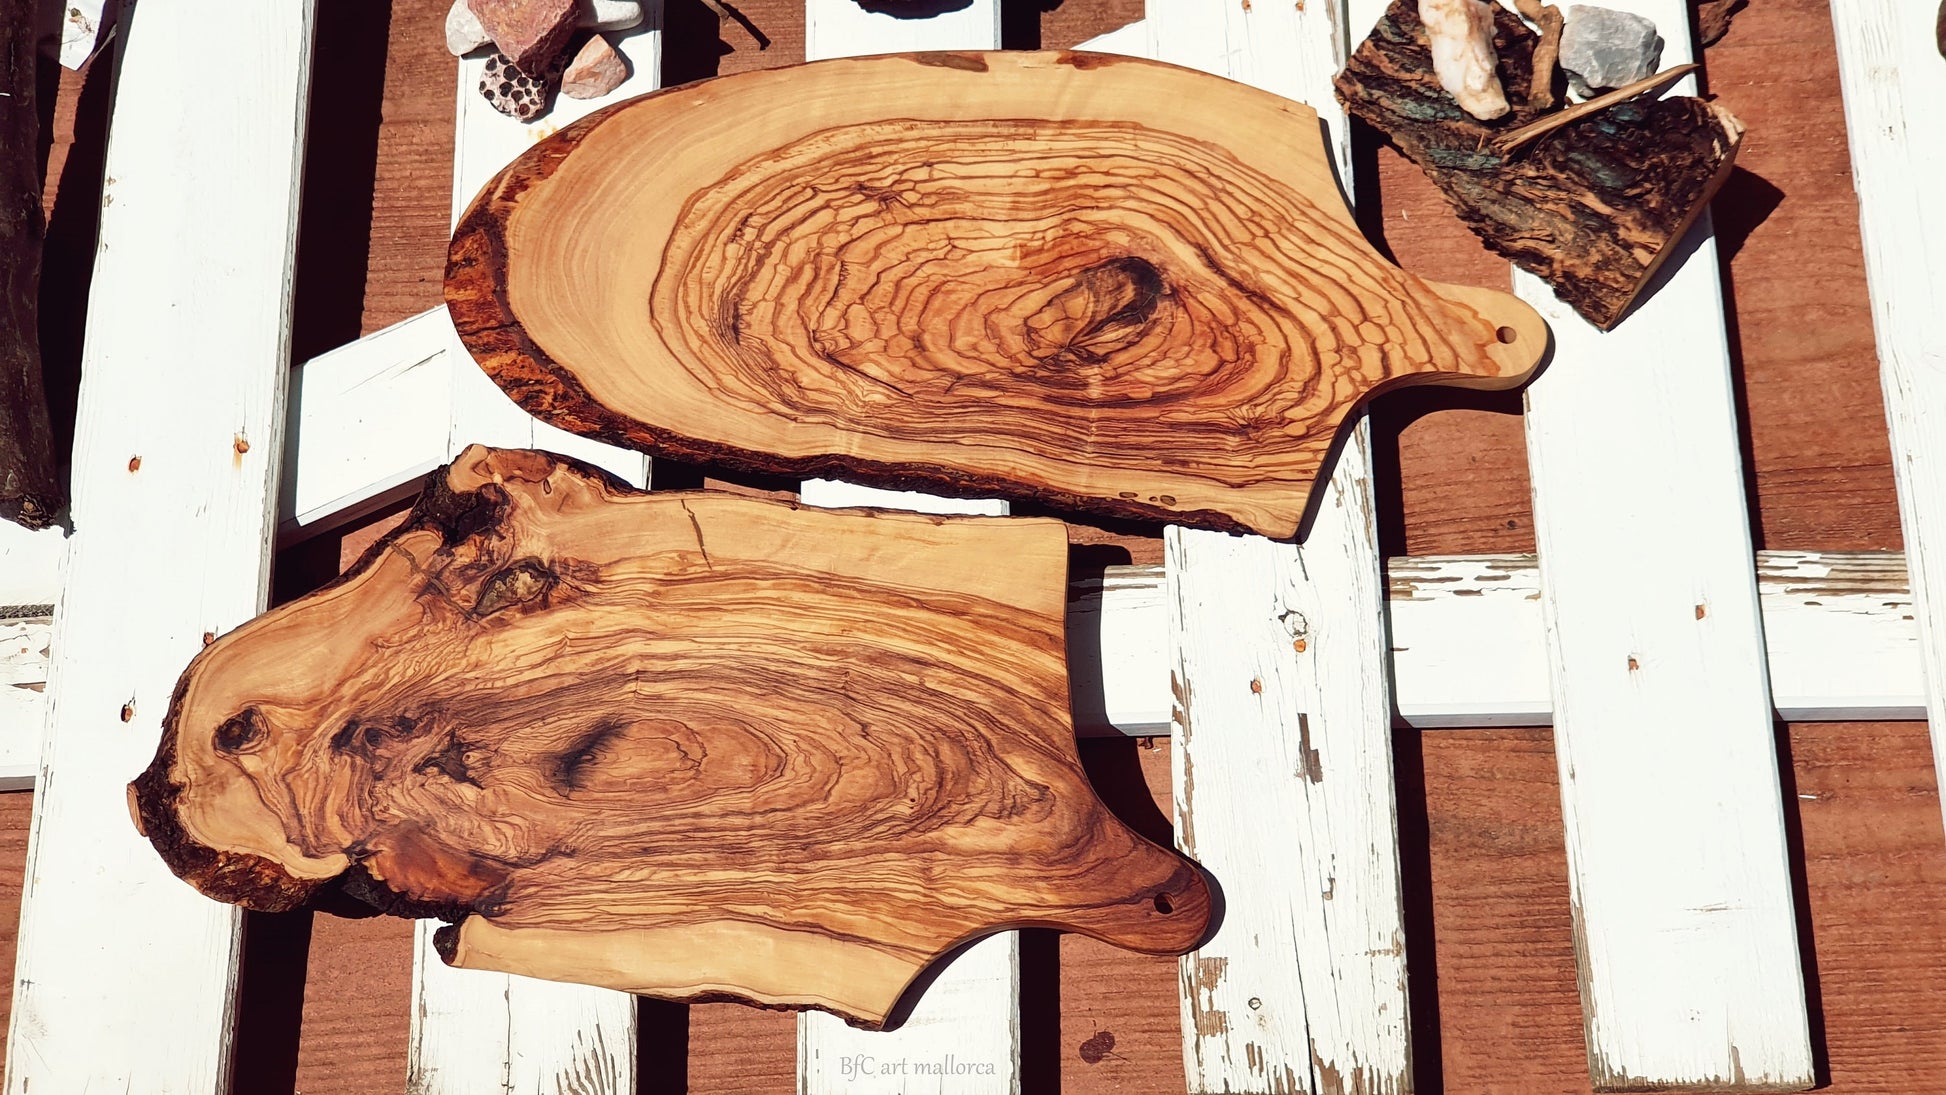 Large chopping board olive wood. Center piece for your kitchen, rustic,  handmade